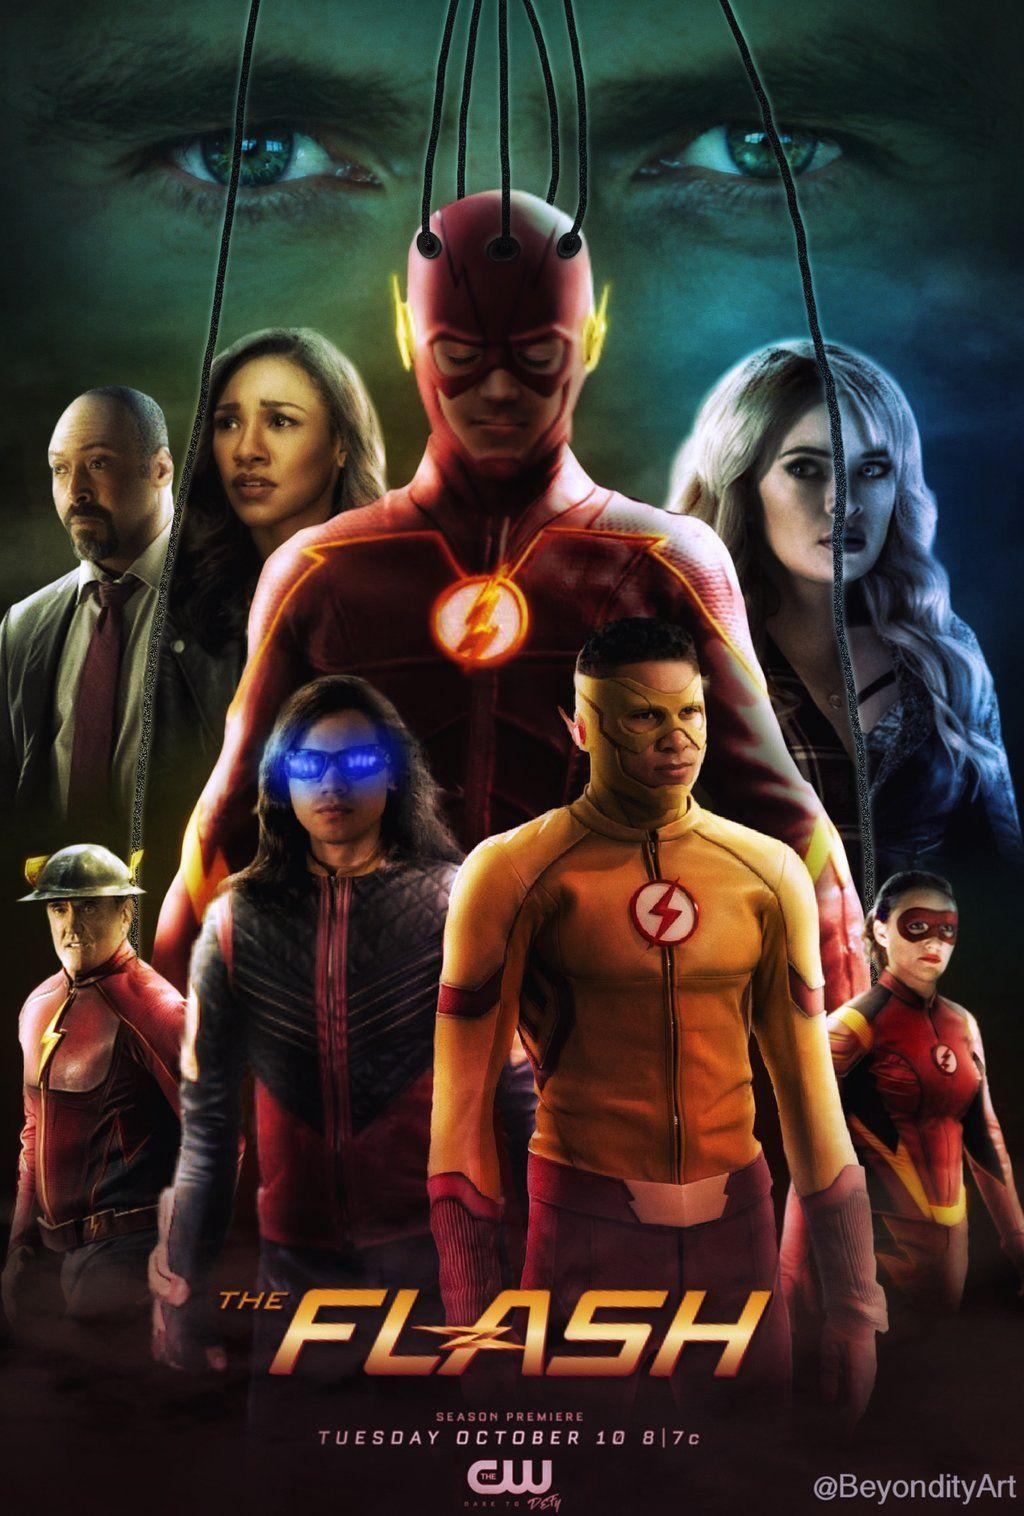 The Flash Poster Collection (Television): High Quality Printable